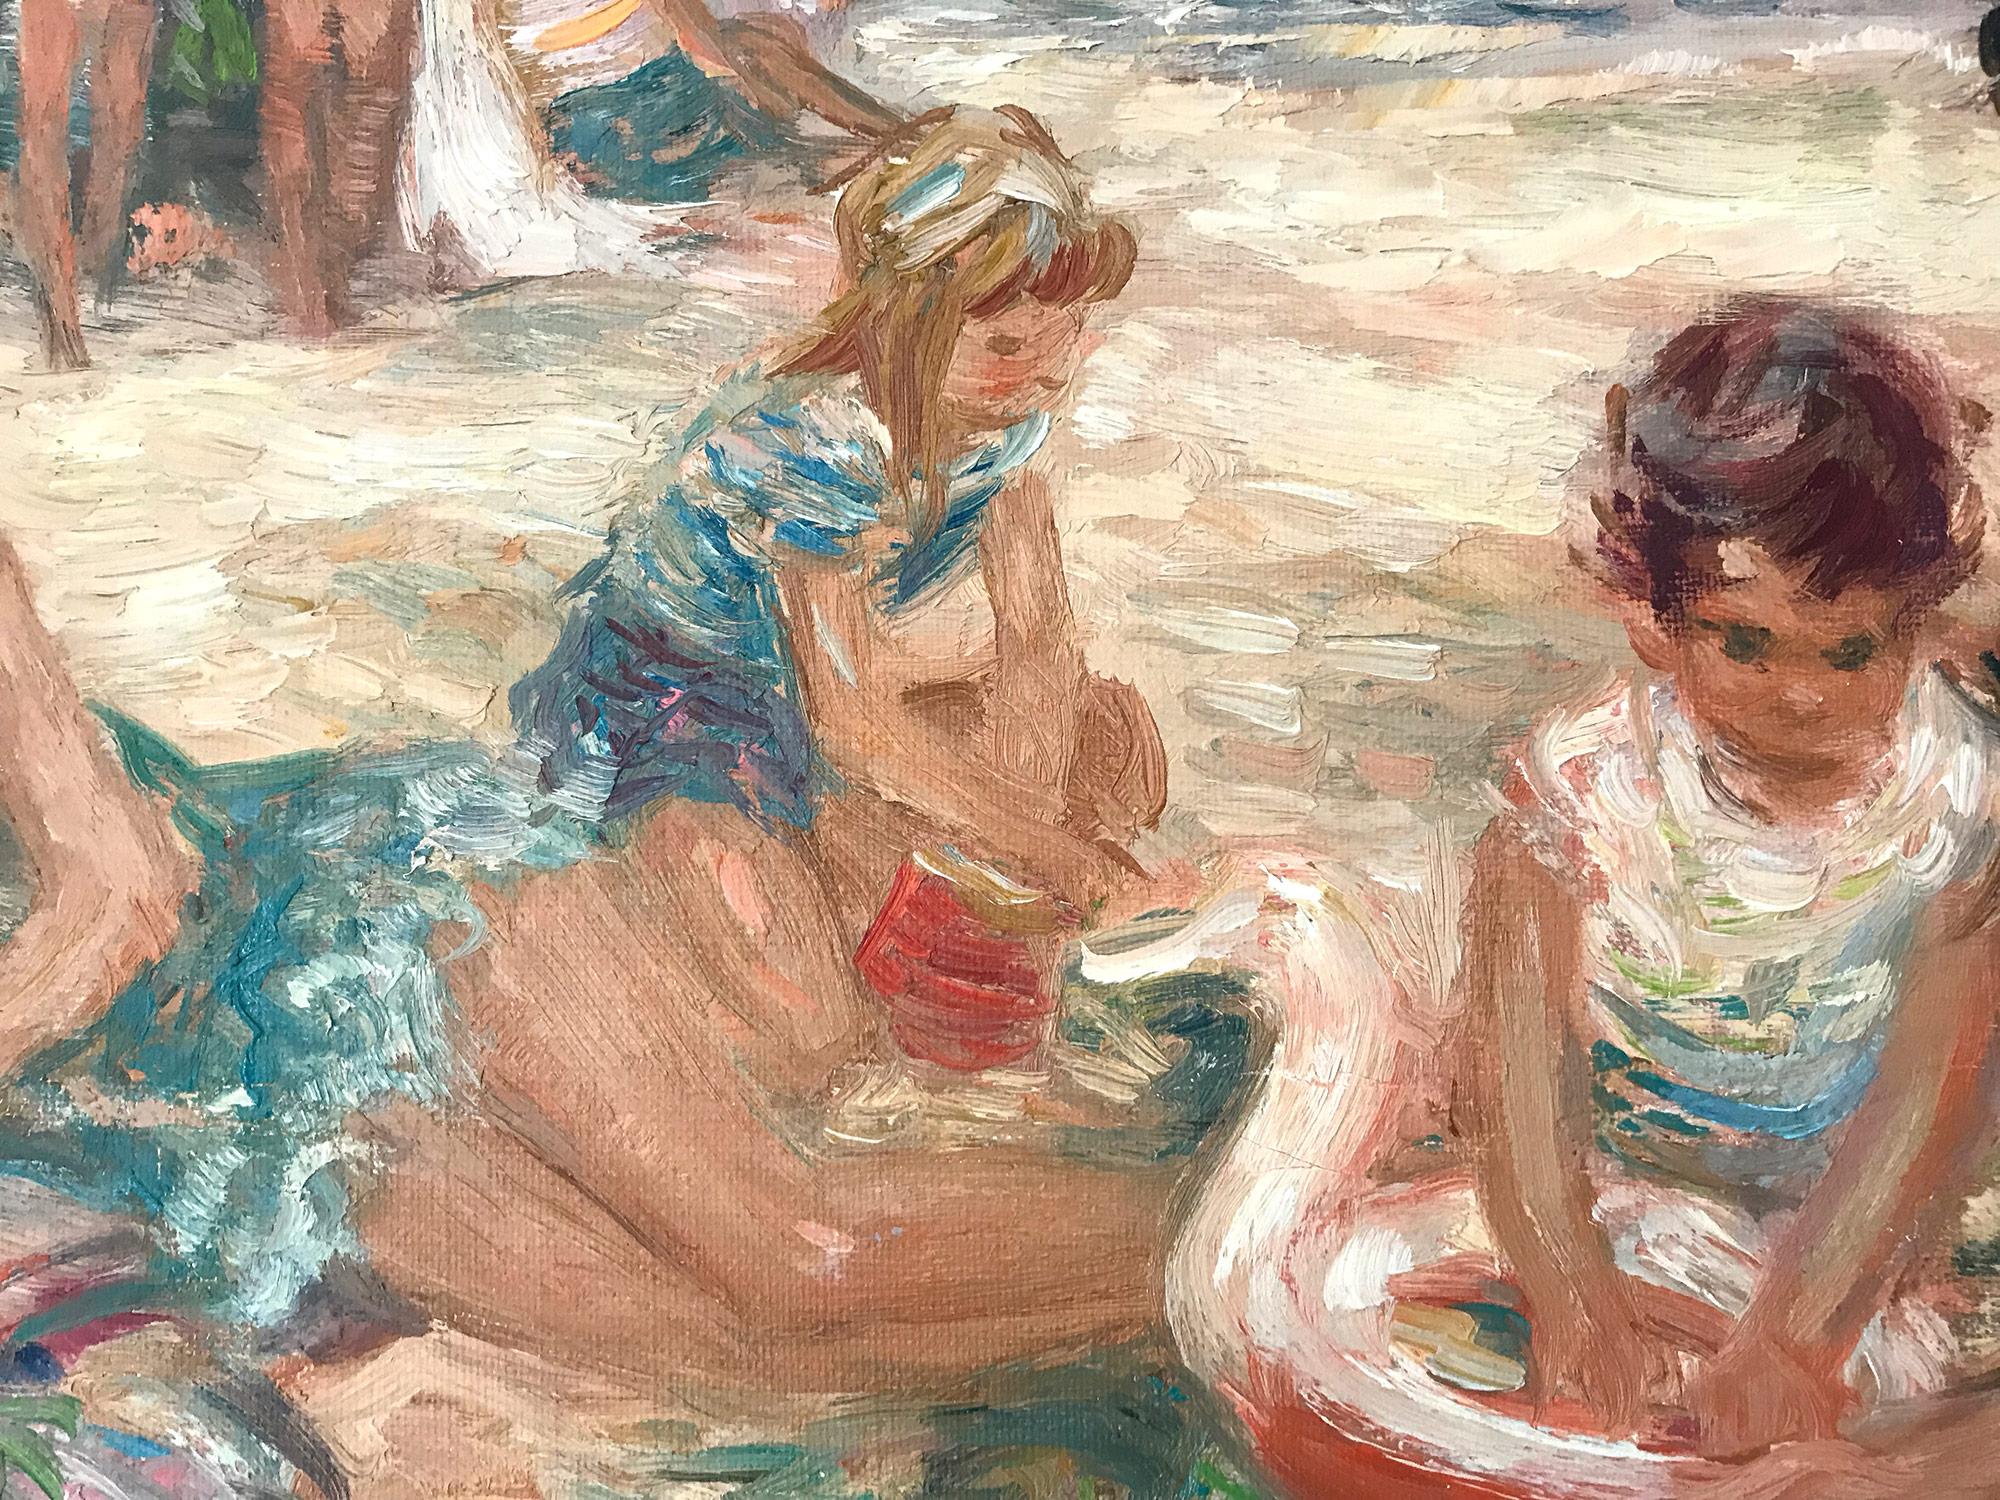 A stunning oil painting depicting figures at the beach in the 20th Century. Duteurtre was known for his charming intimate figurative scenes portraying life in Europe. He was active, picking up subjects from the markets, beaches, parks, restaurants,